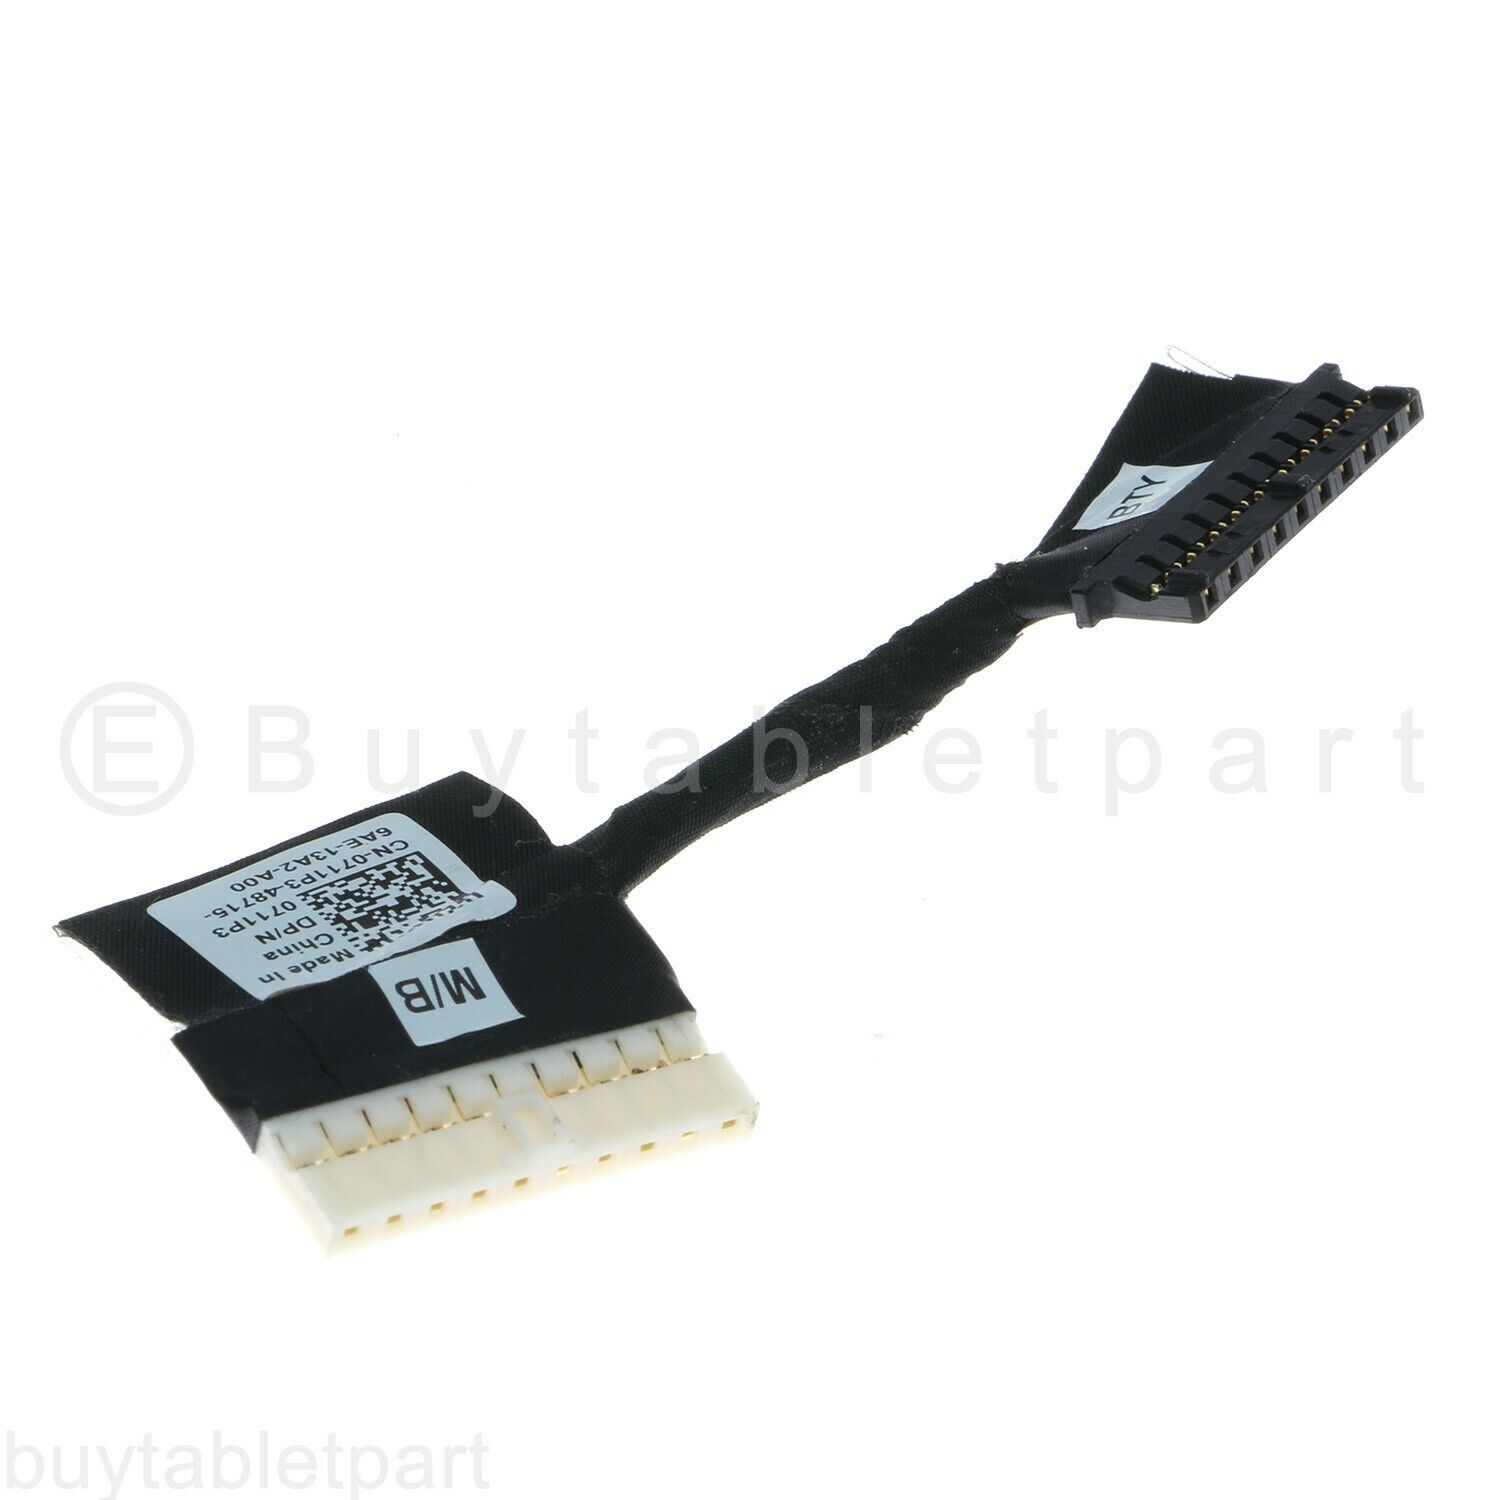 NEW Battery Cable For Dell Inspiron 13 5378 5379 5368 3390 7375 7579